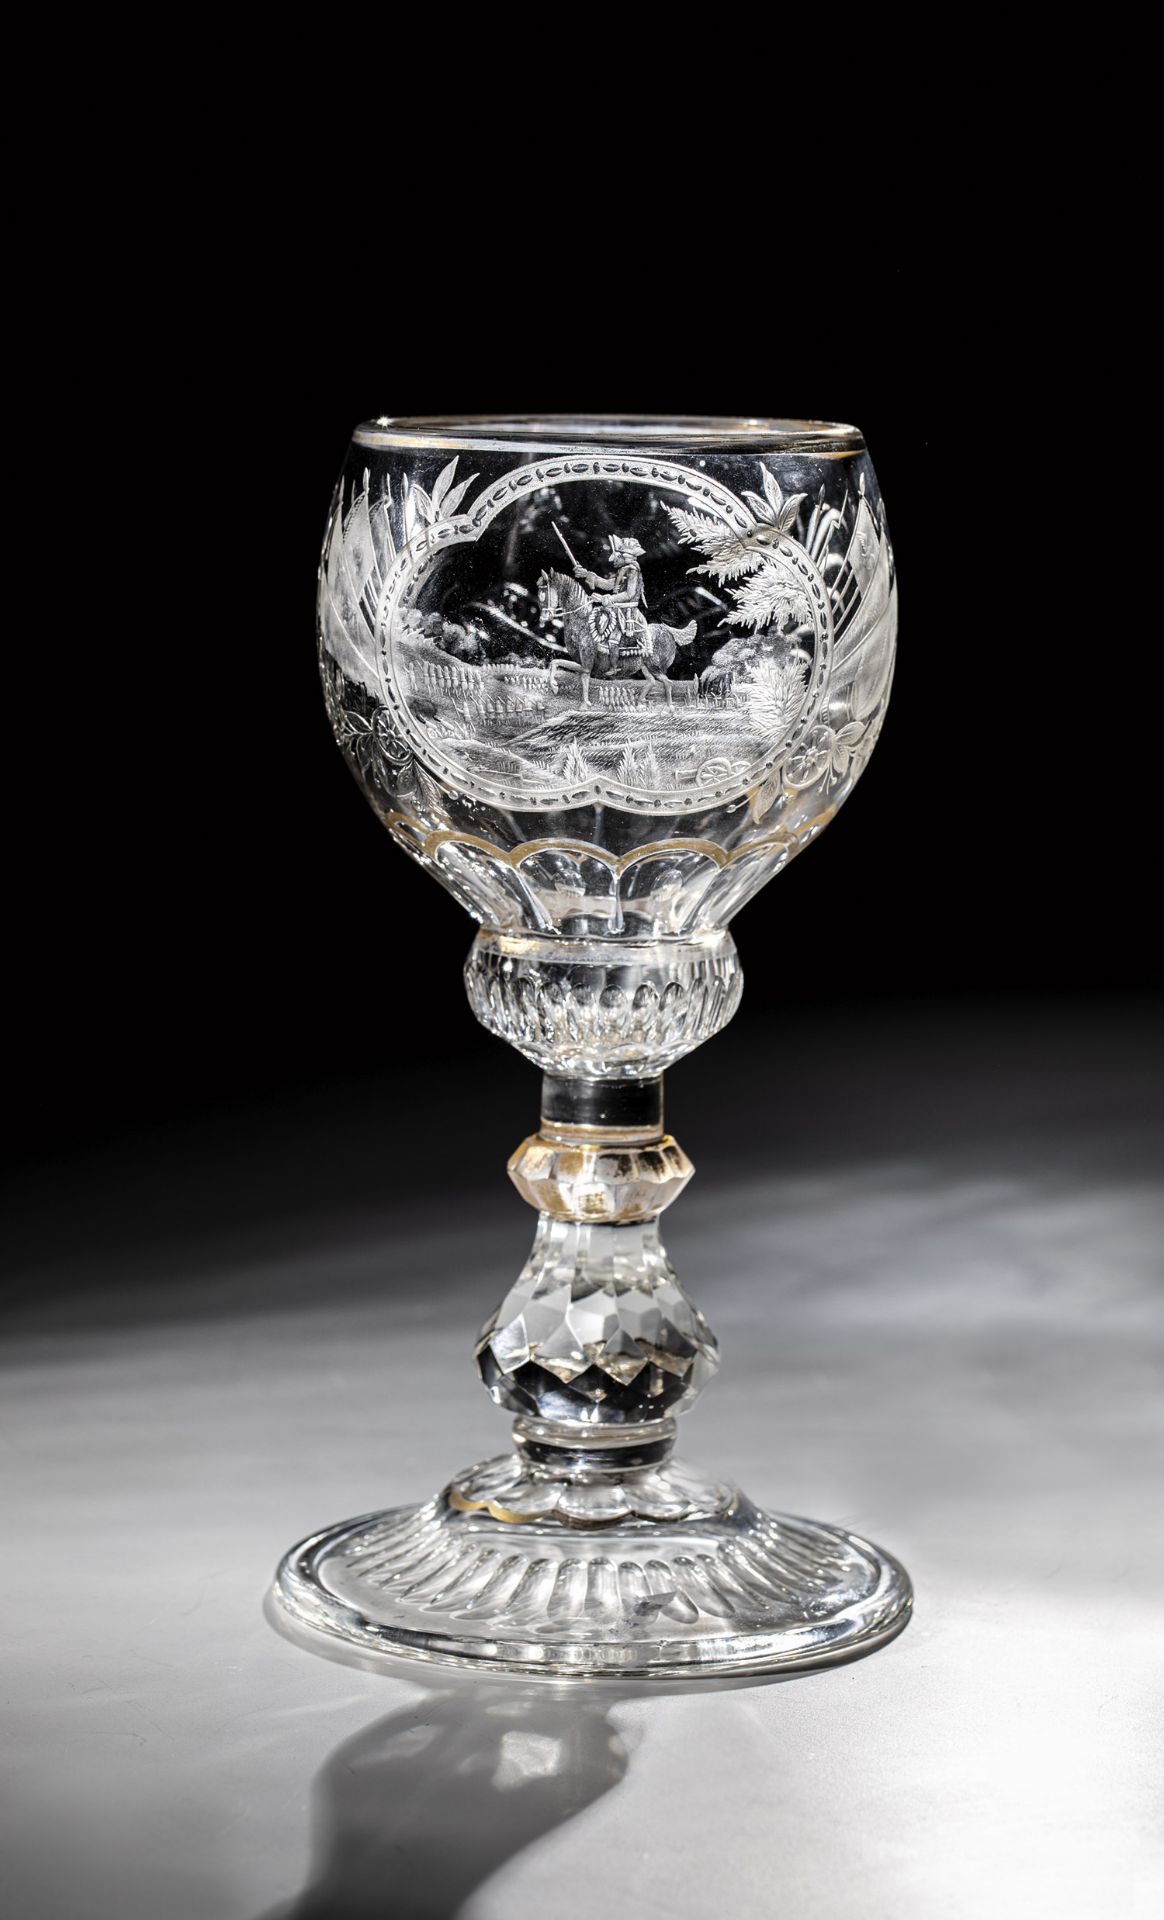 Goblet with Prussian King Frederick II ''Old Fritz'' Elias Rosbach (attributed), Zechlin around 1745